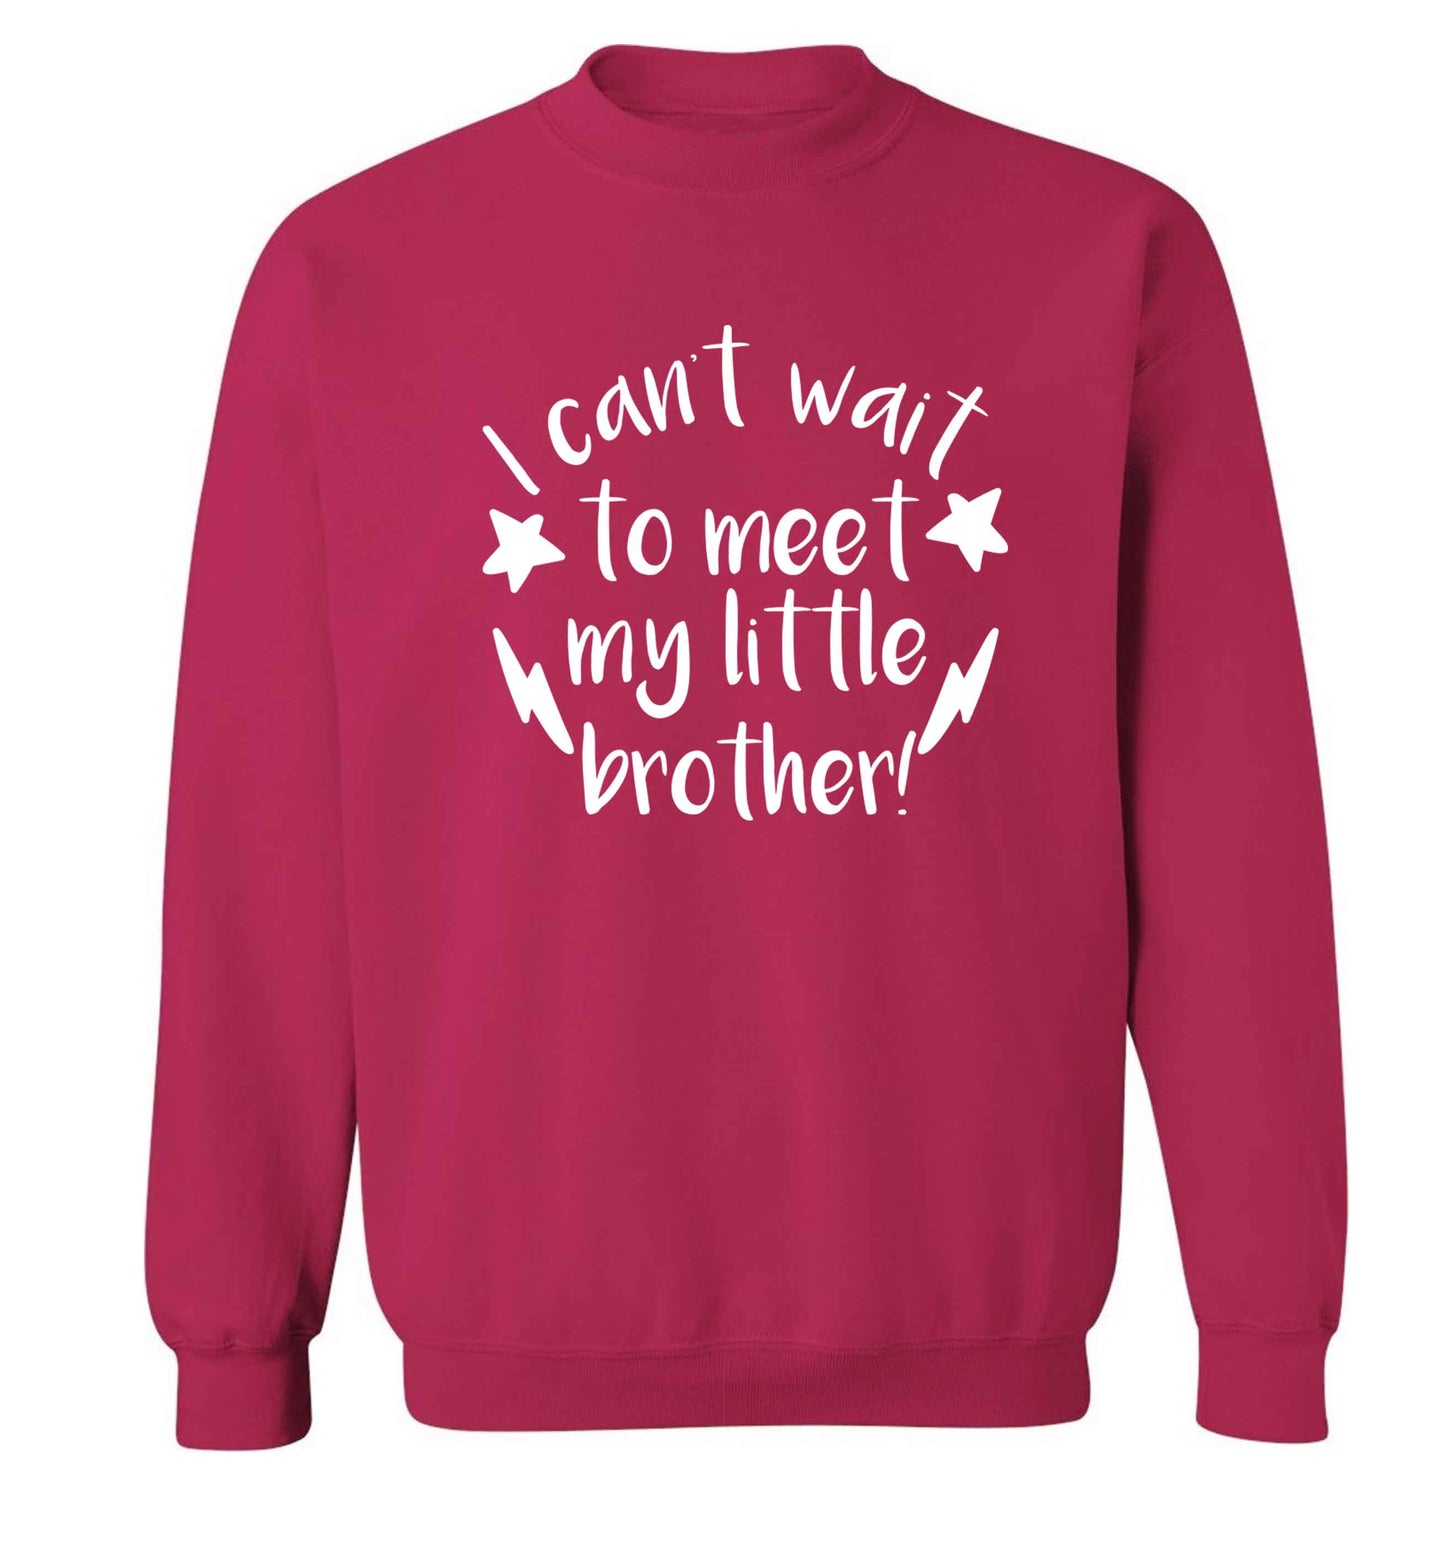 I can't wait to meet my sister! Adult's unisex pink Sweater 2XL